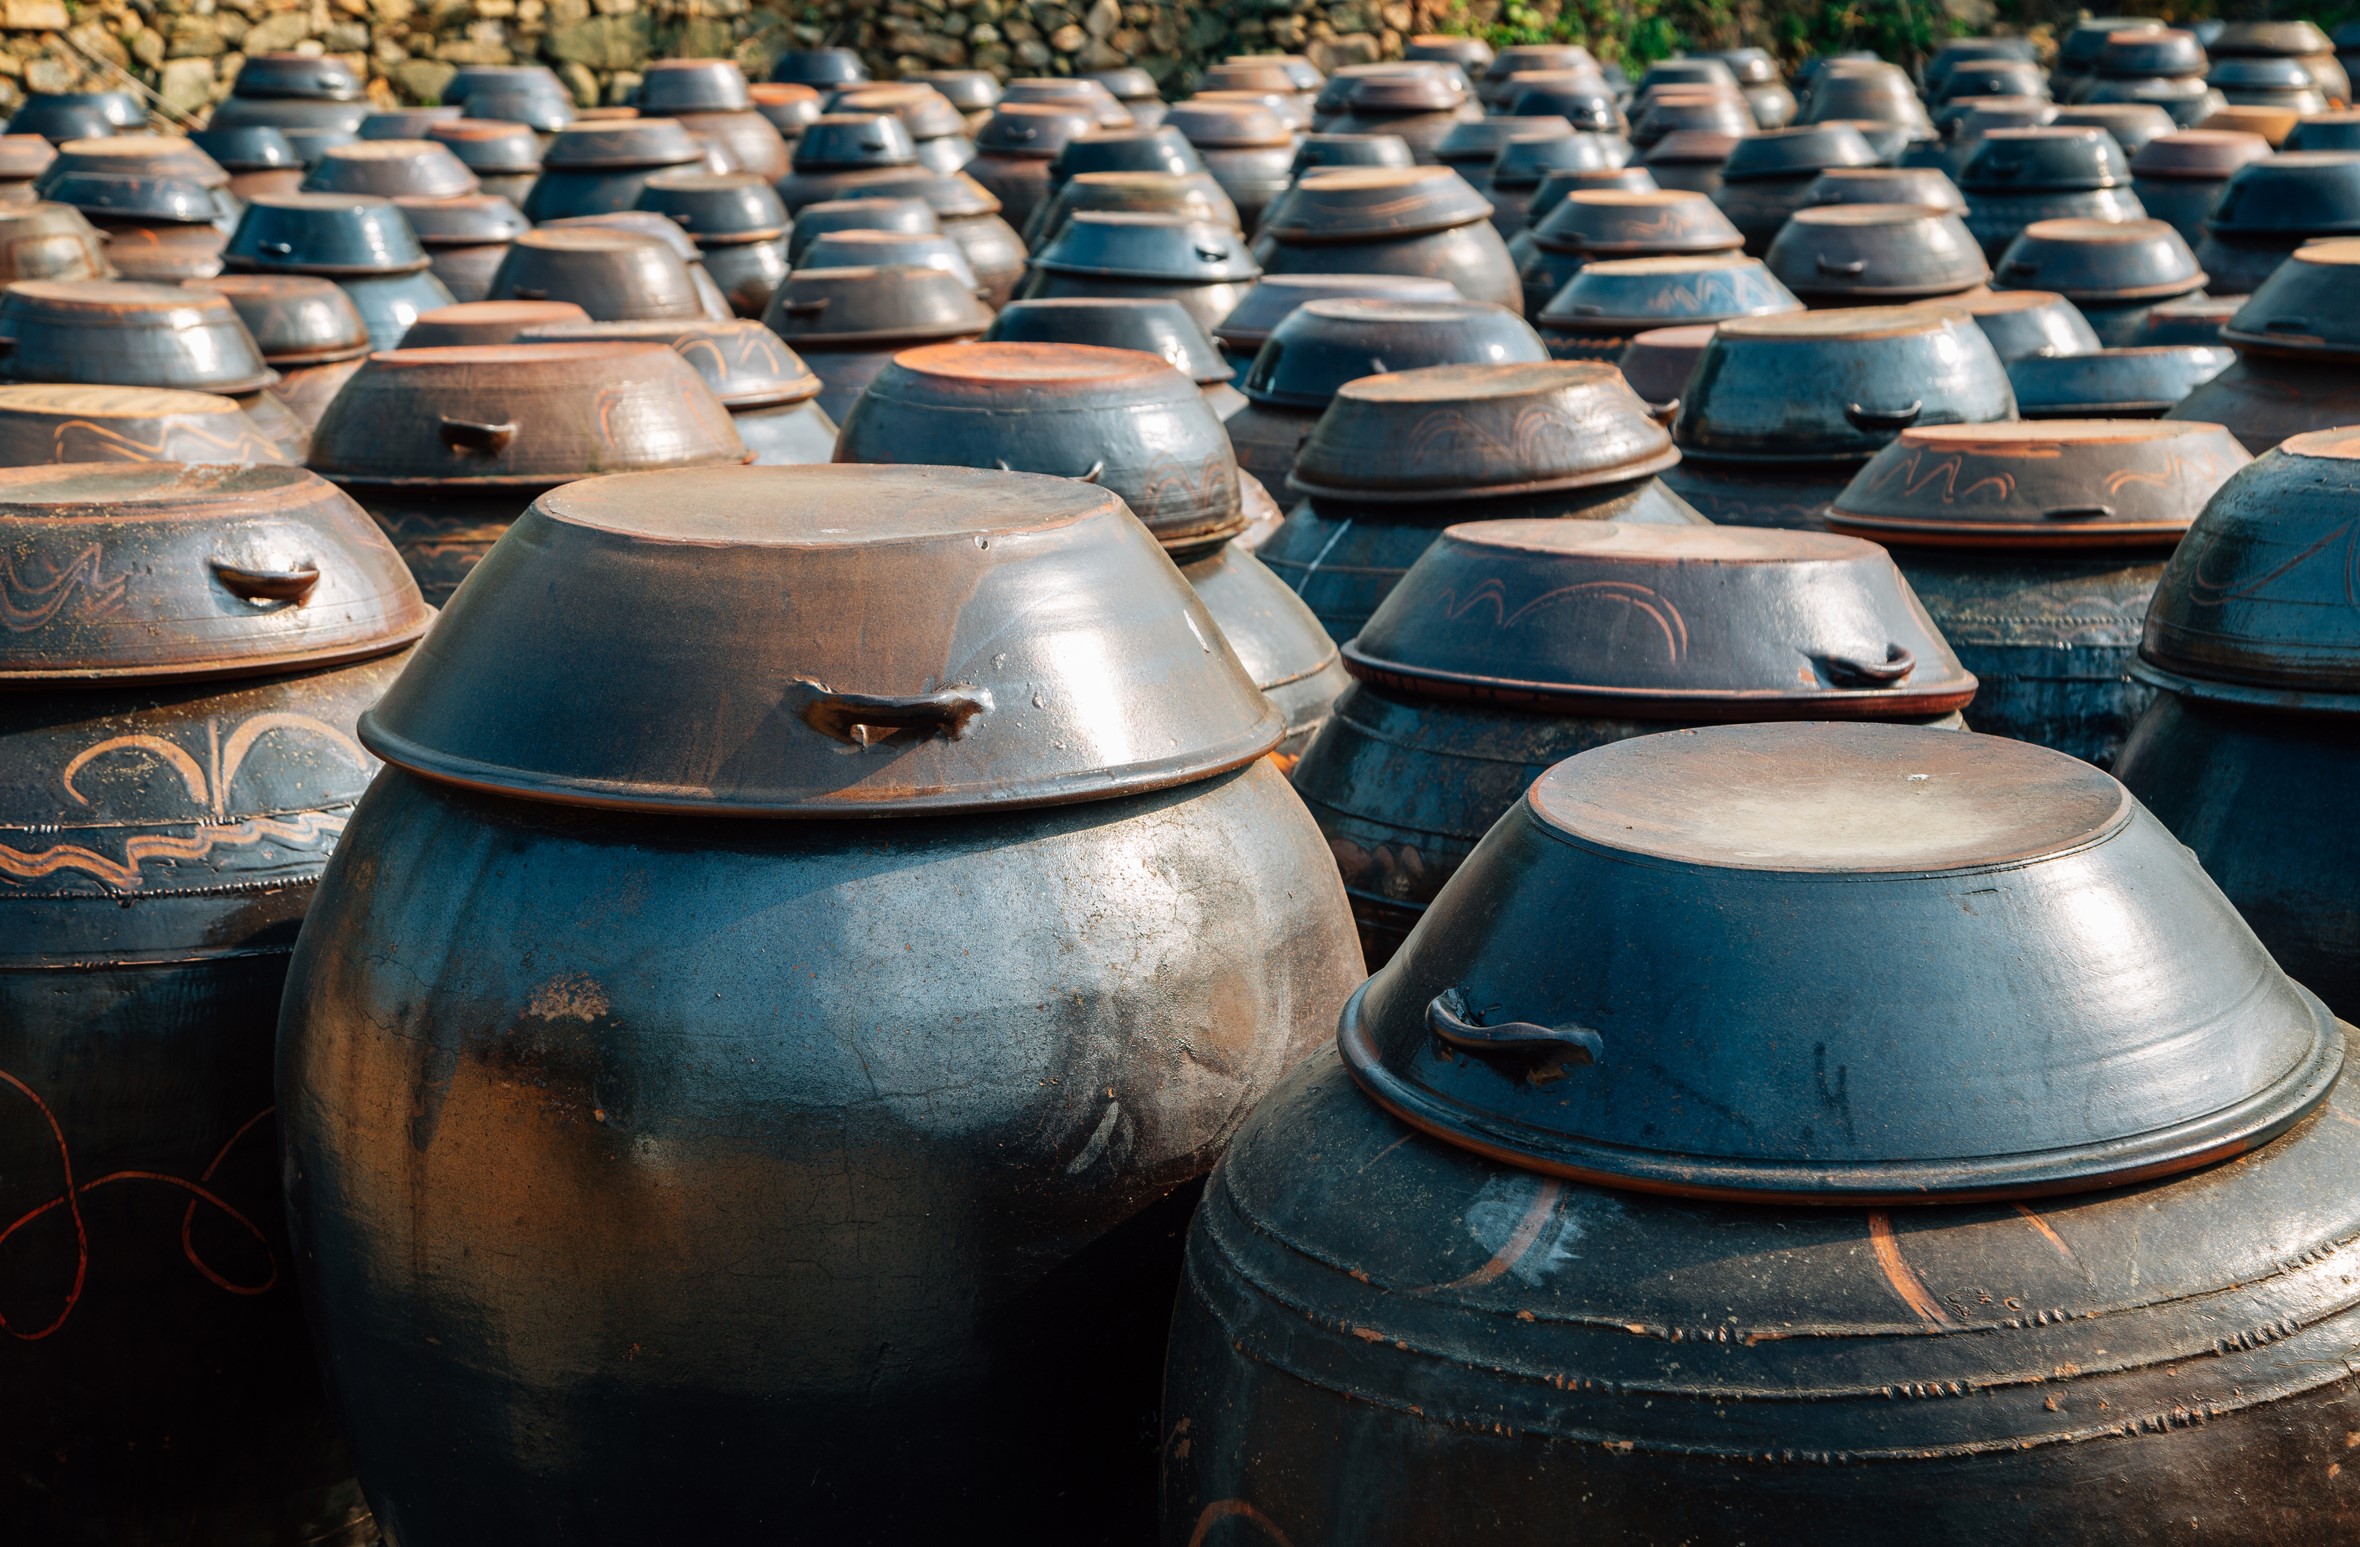 Rows of heavy earthenware pots can often be found in a traditional Korean household. These airtight vessels, often called “onggi” in Korean, translates to “breathing pot” — named for its ability to store & allow fresh food to ferment naturally. In this case, for the process of kimchi making. How to Make Kimchi